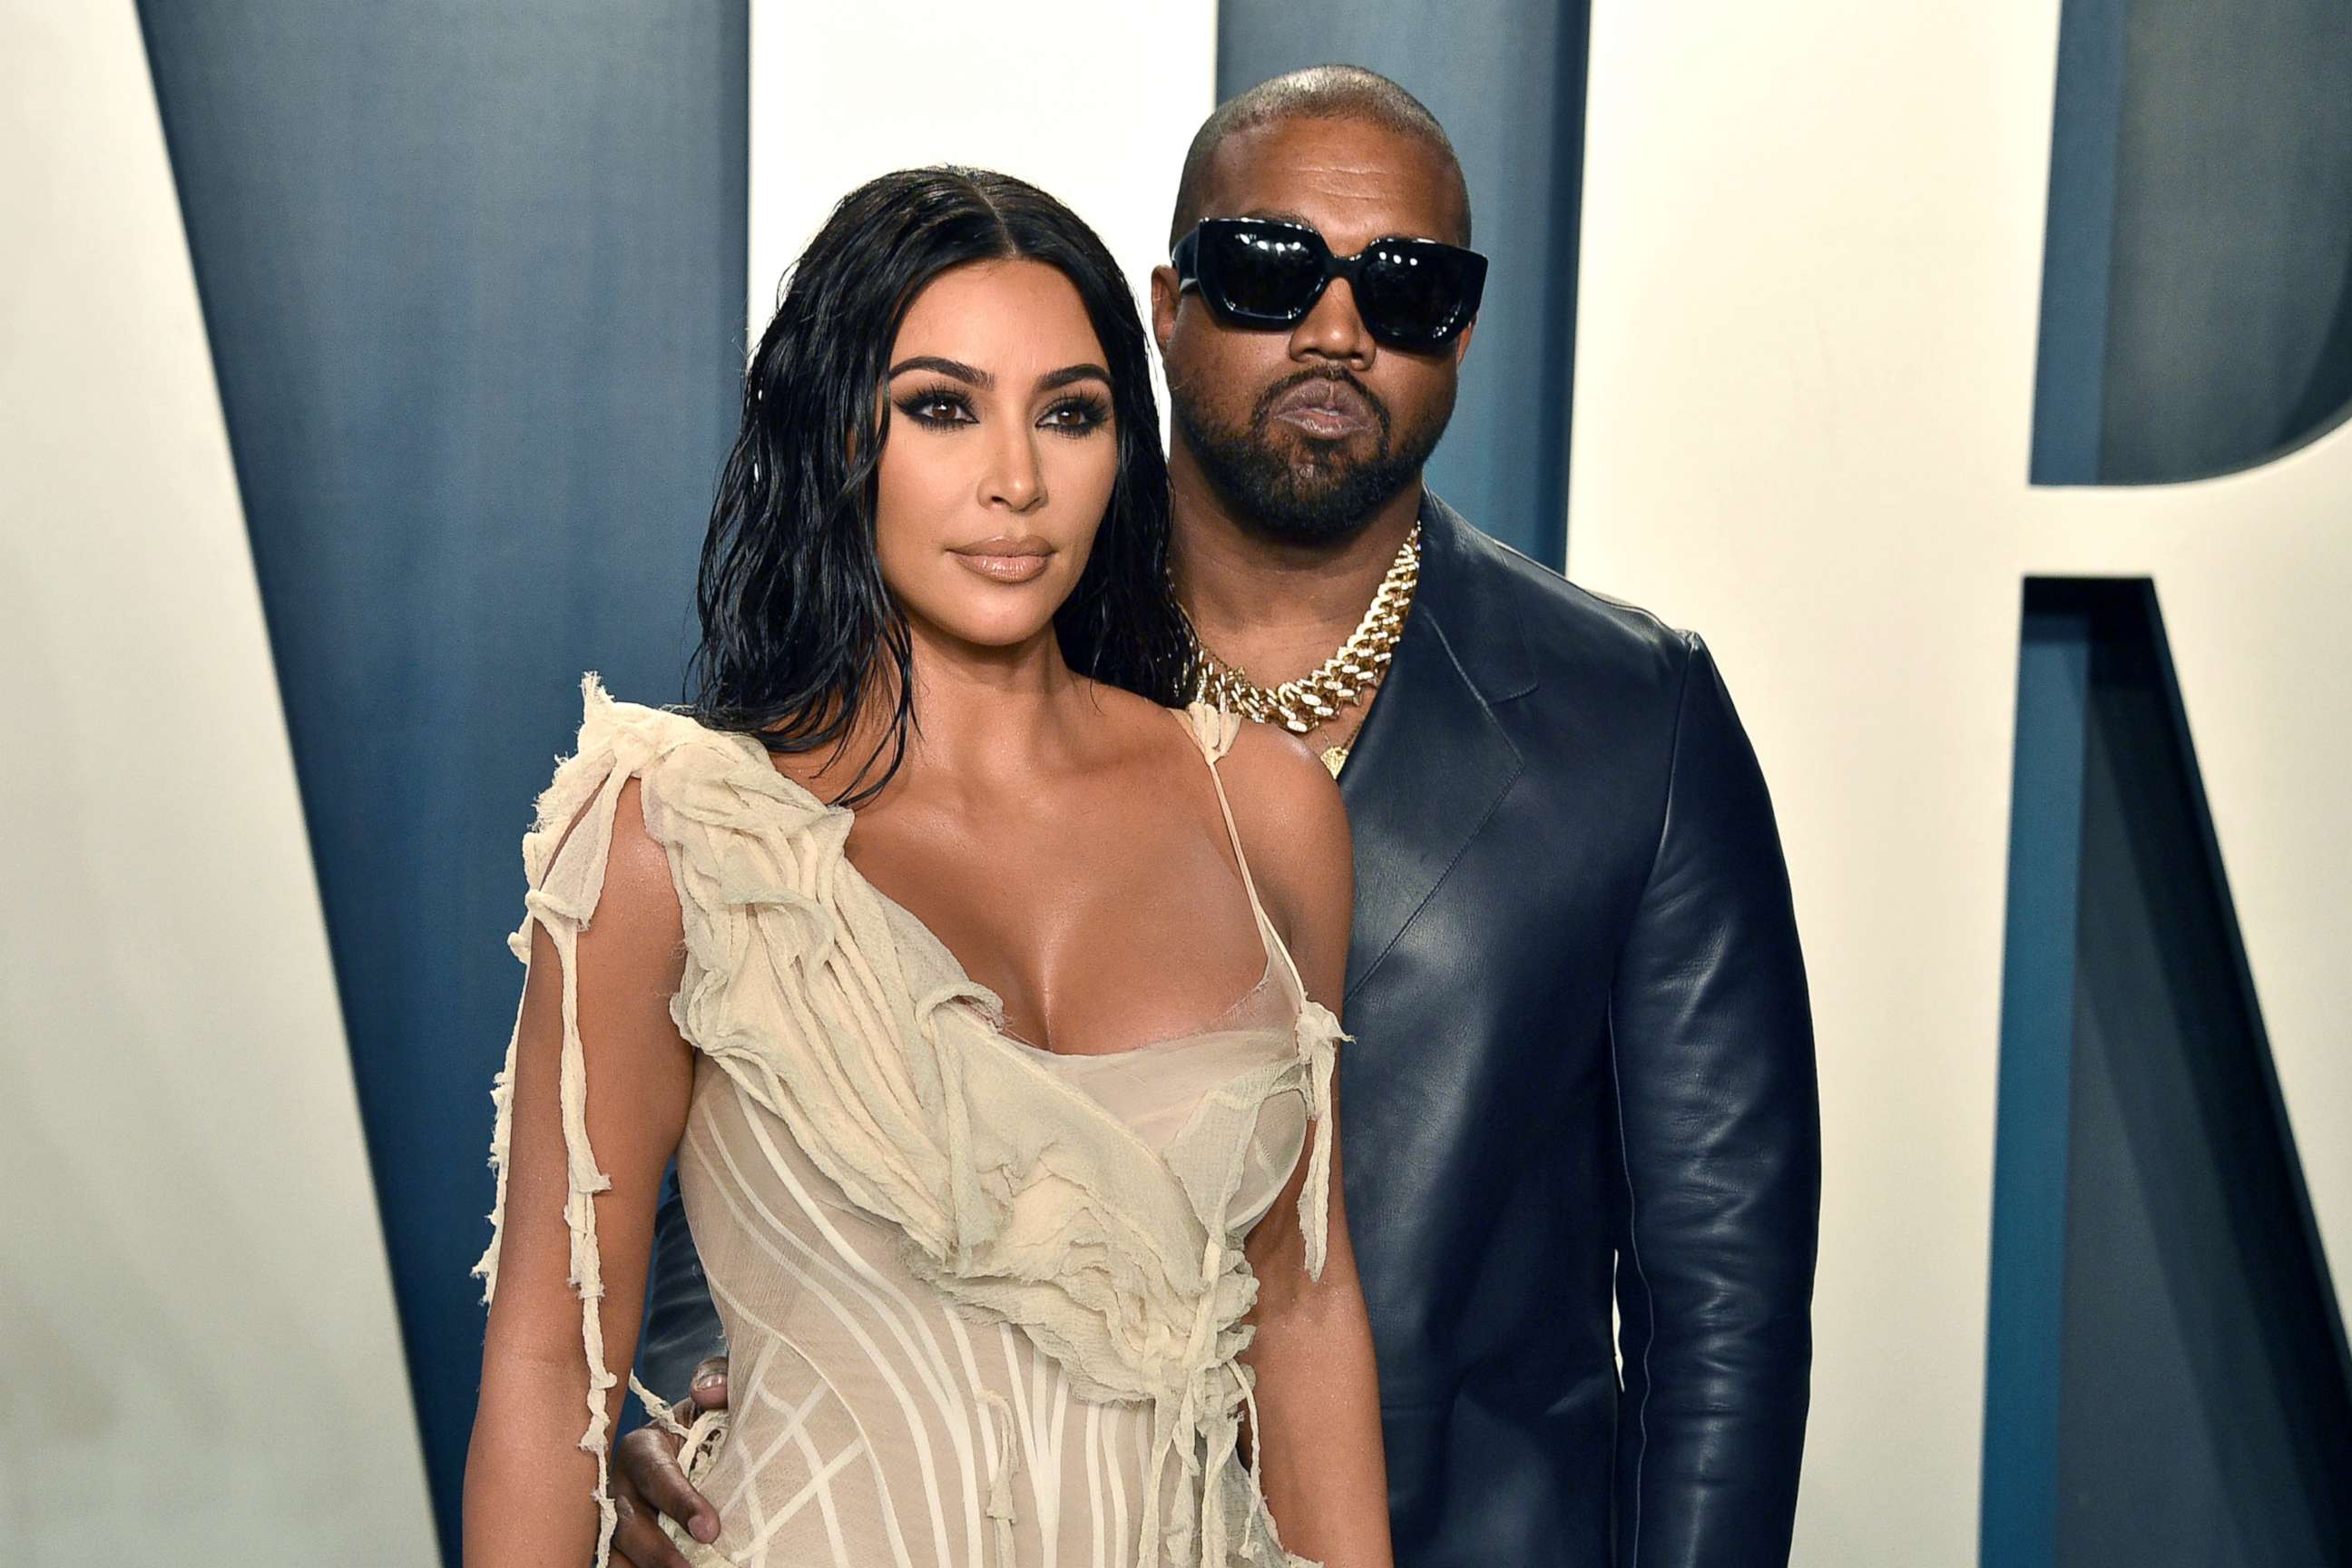 PHOTO: Kim Kardashian and Kanye West attend the 2020 Vanity Fair Oscar Party, Feb. 9, 2020, in Beverly Hills, Calif.